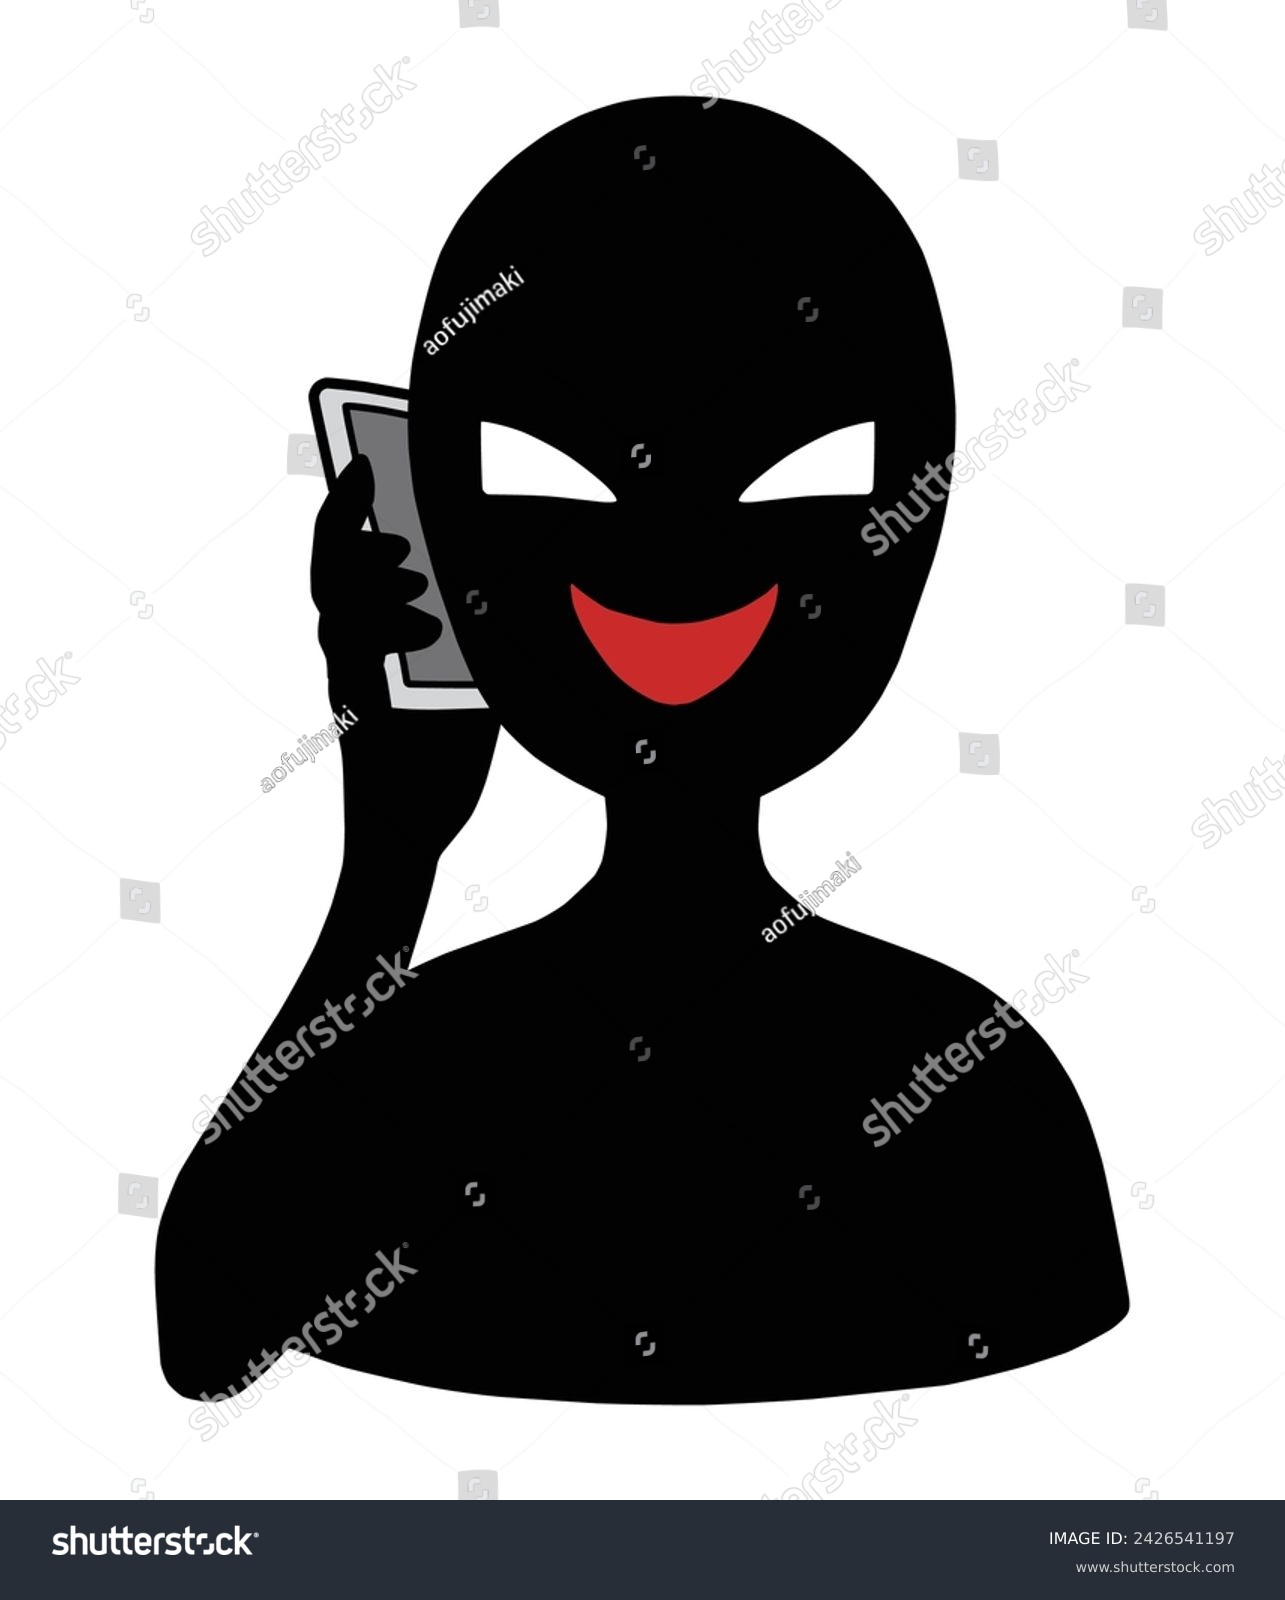 SVG of Material of a black silhouette of a bad guy talking on a smartphone svg